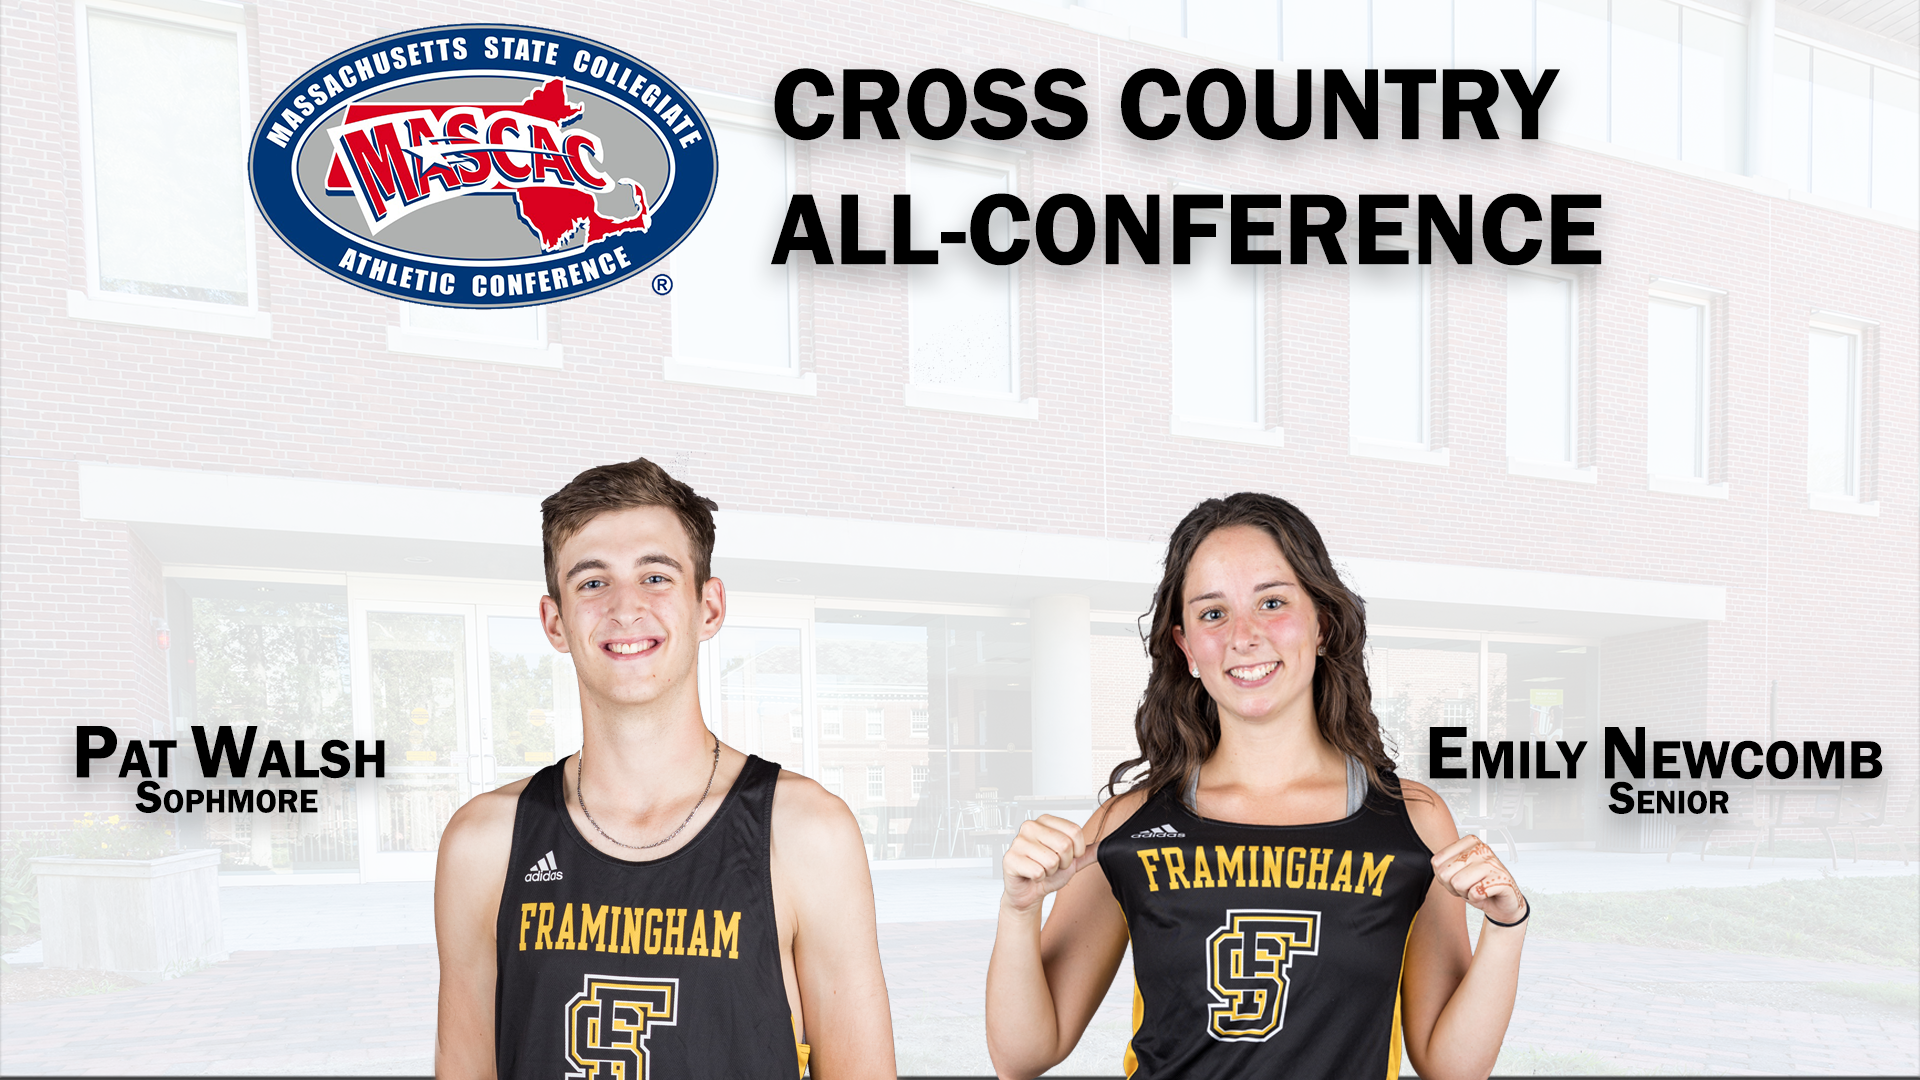 Newcomb and Walsh Earn All-MASCAC Cross Country Honors